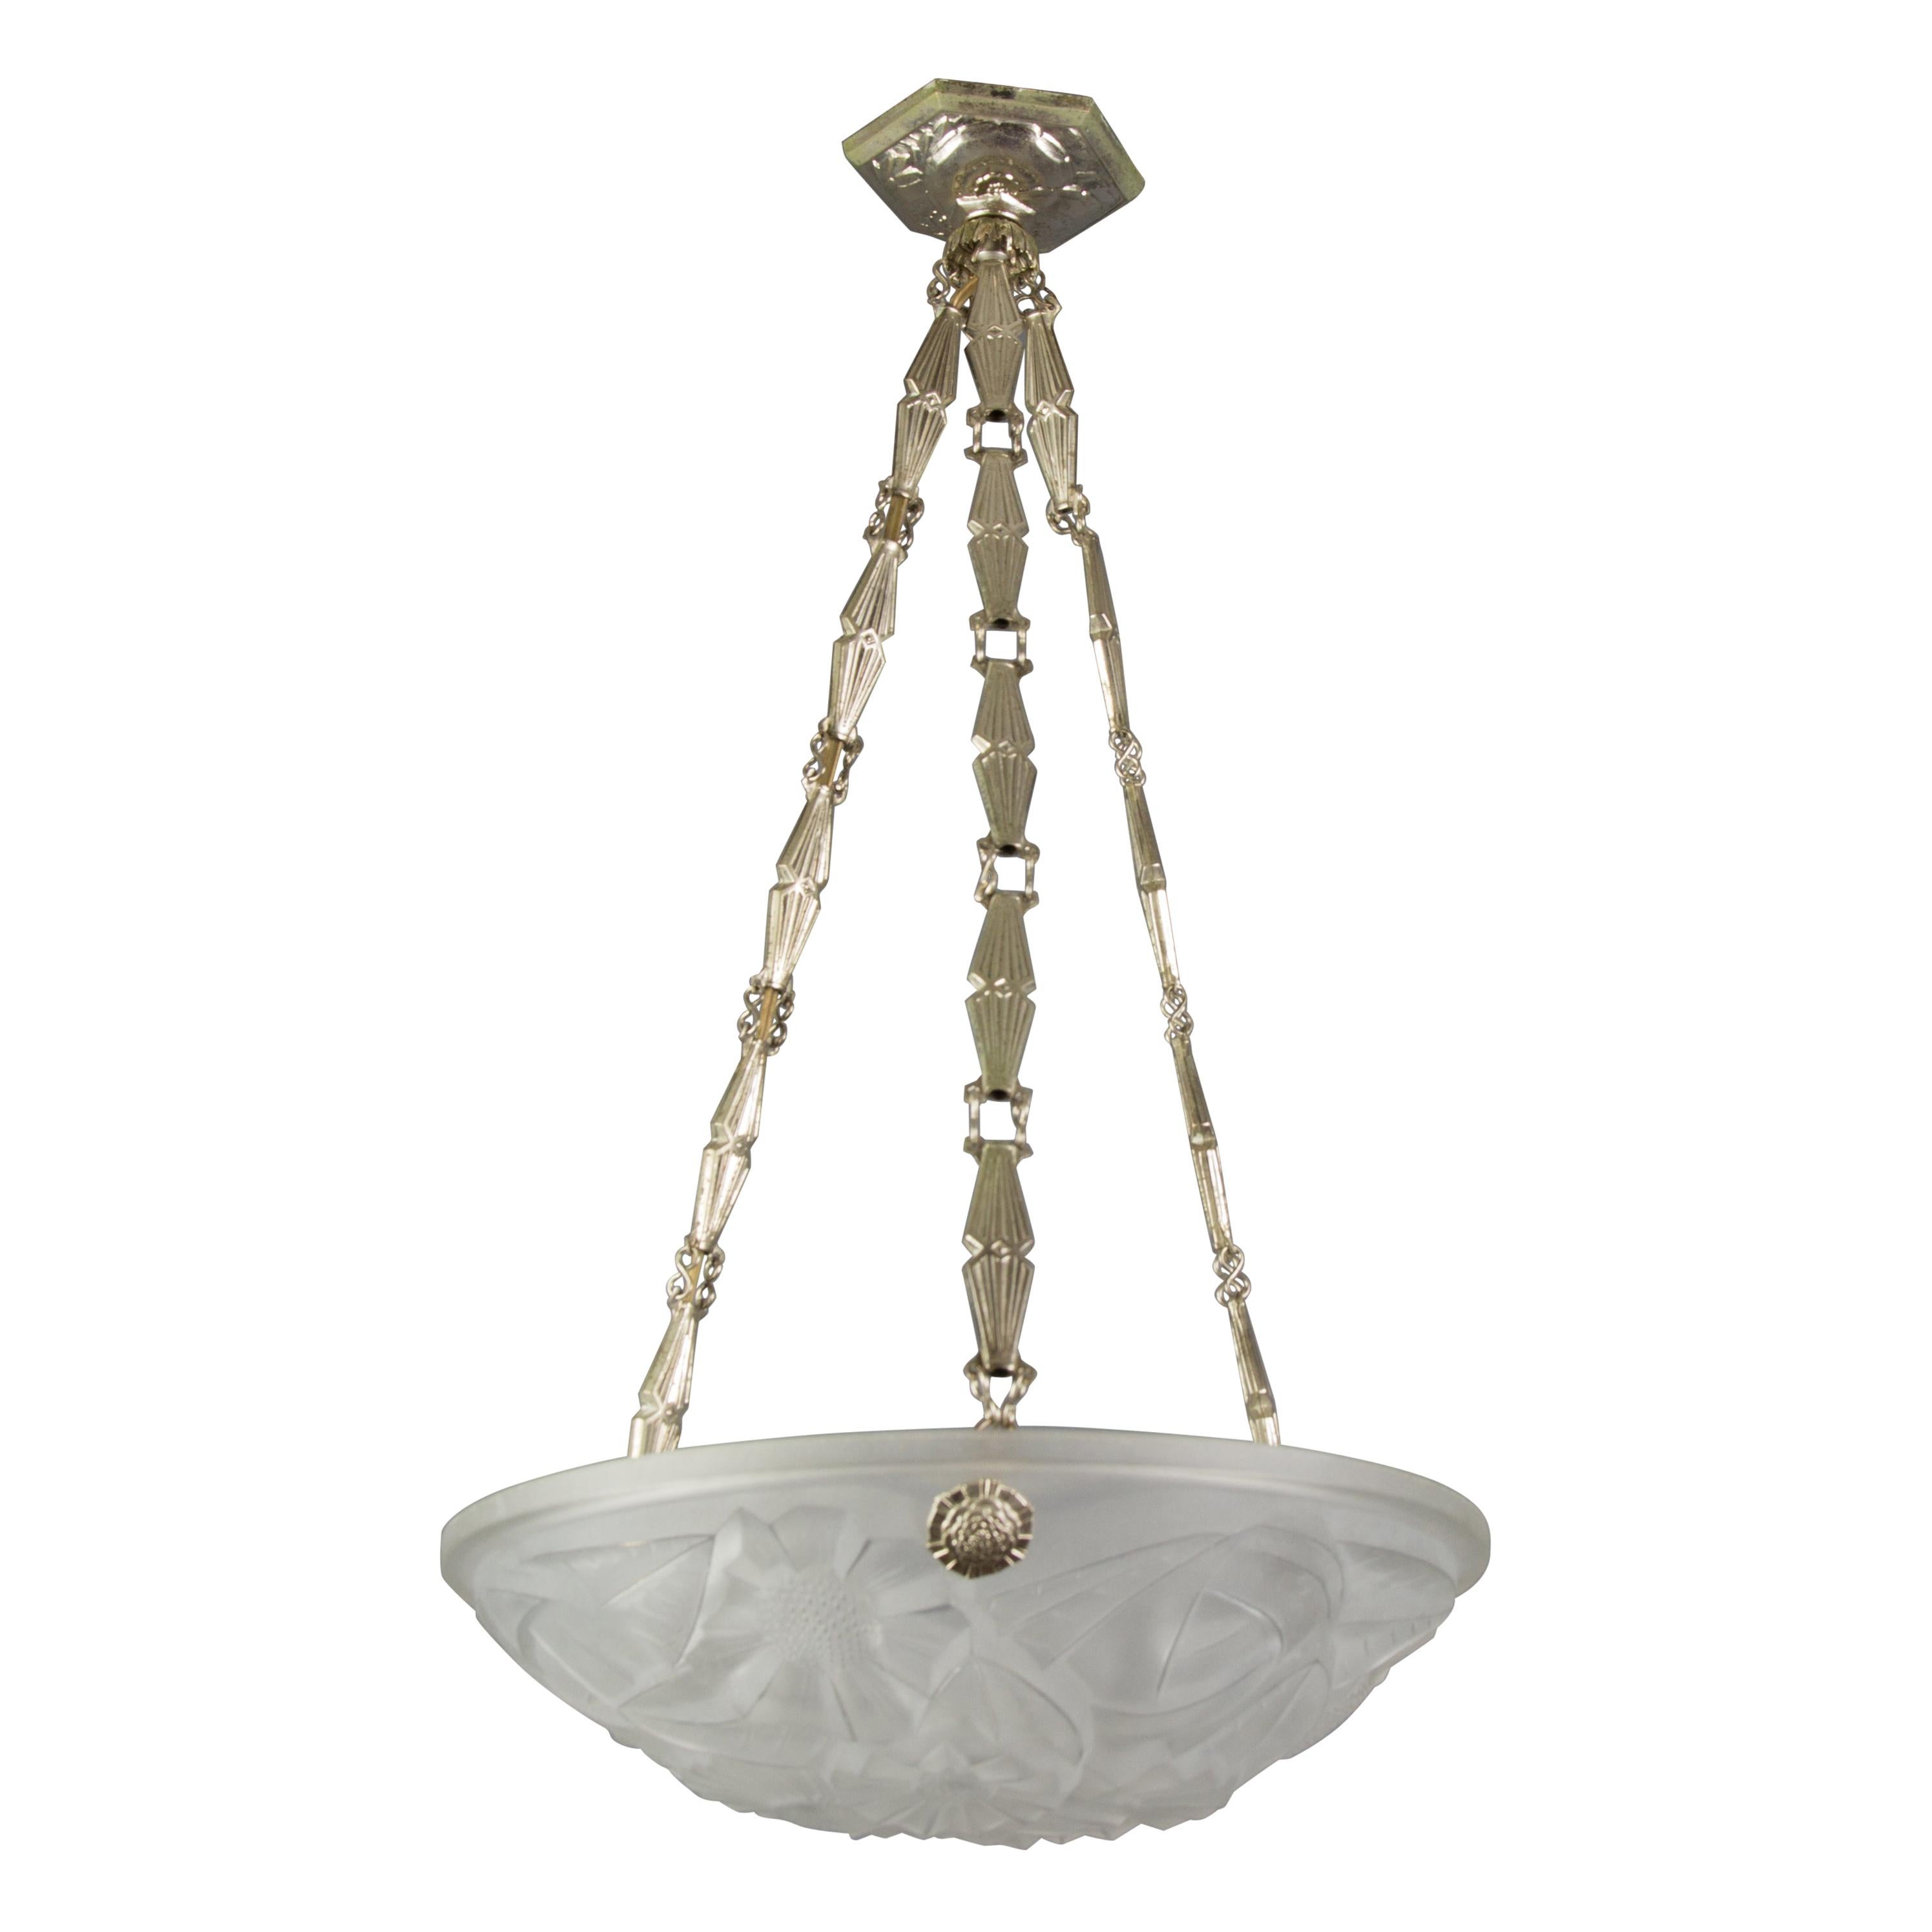 David Gueron French Art Deco Frosted Glass Pendant Chandelier, 1930s